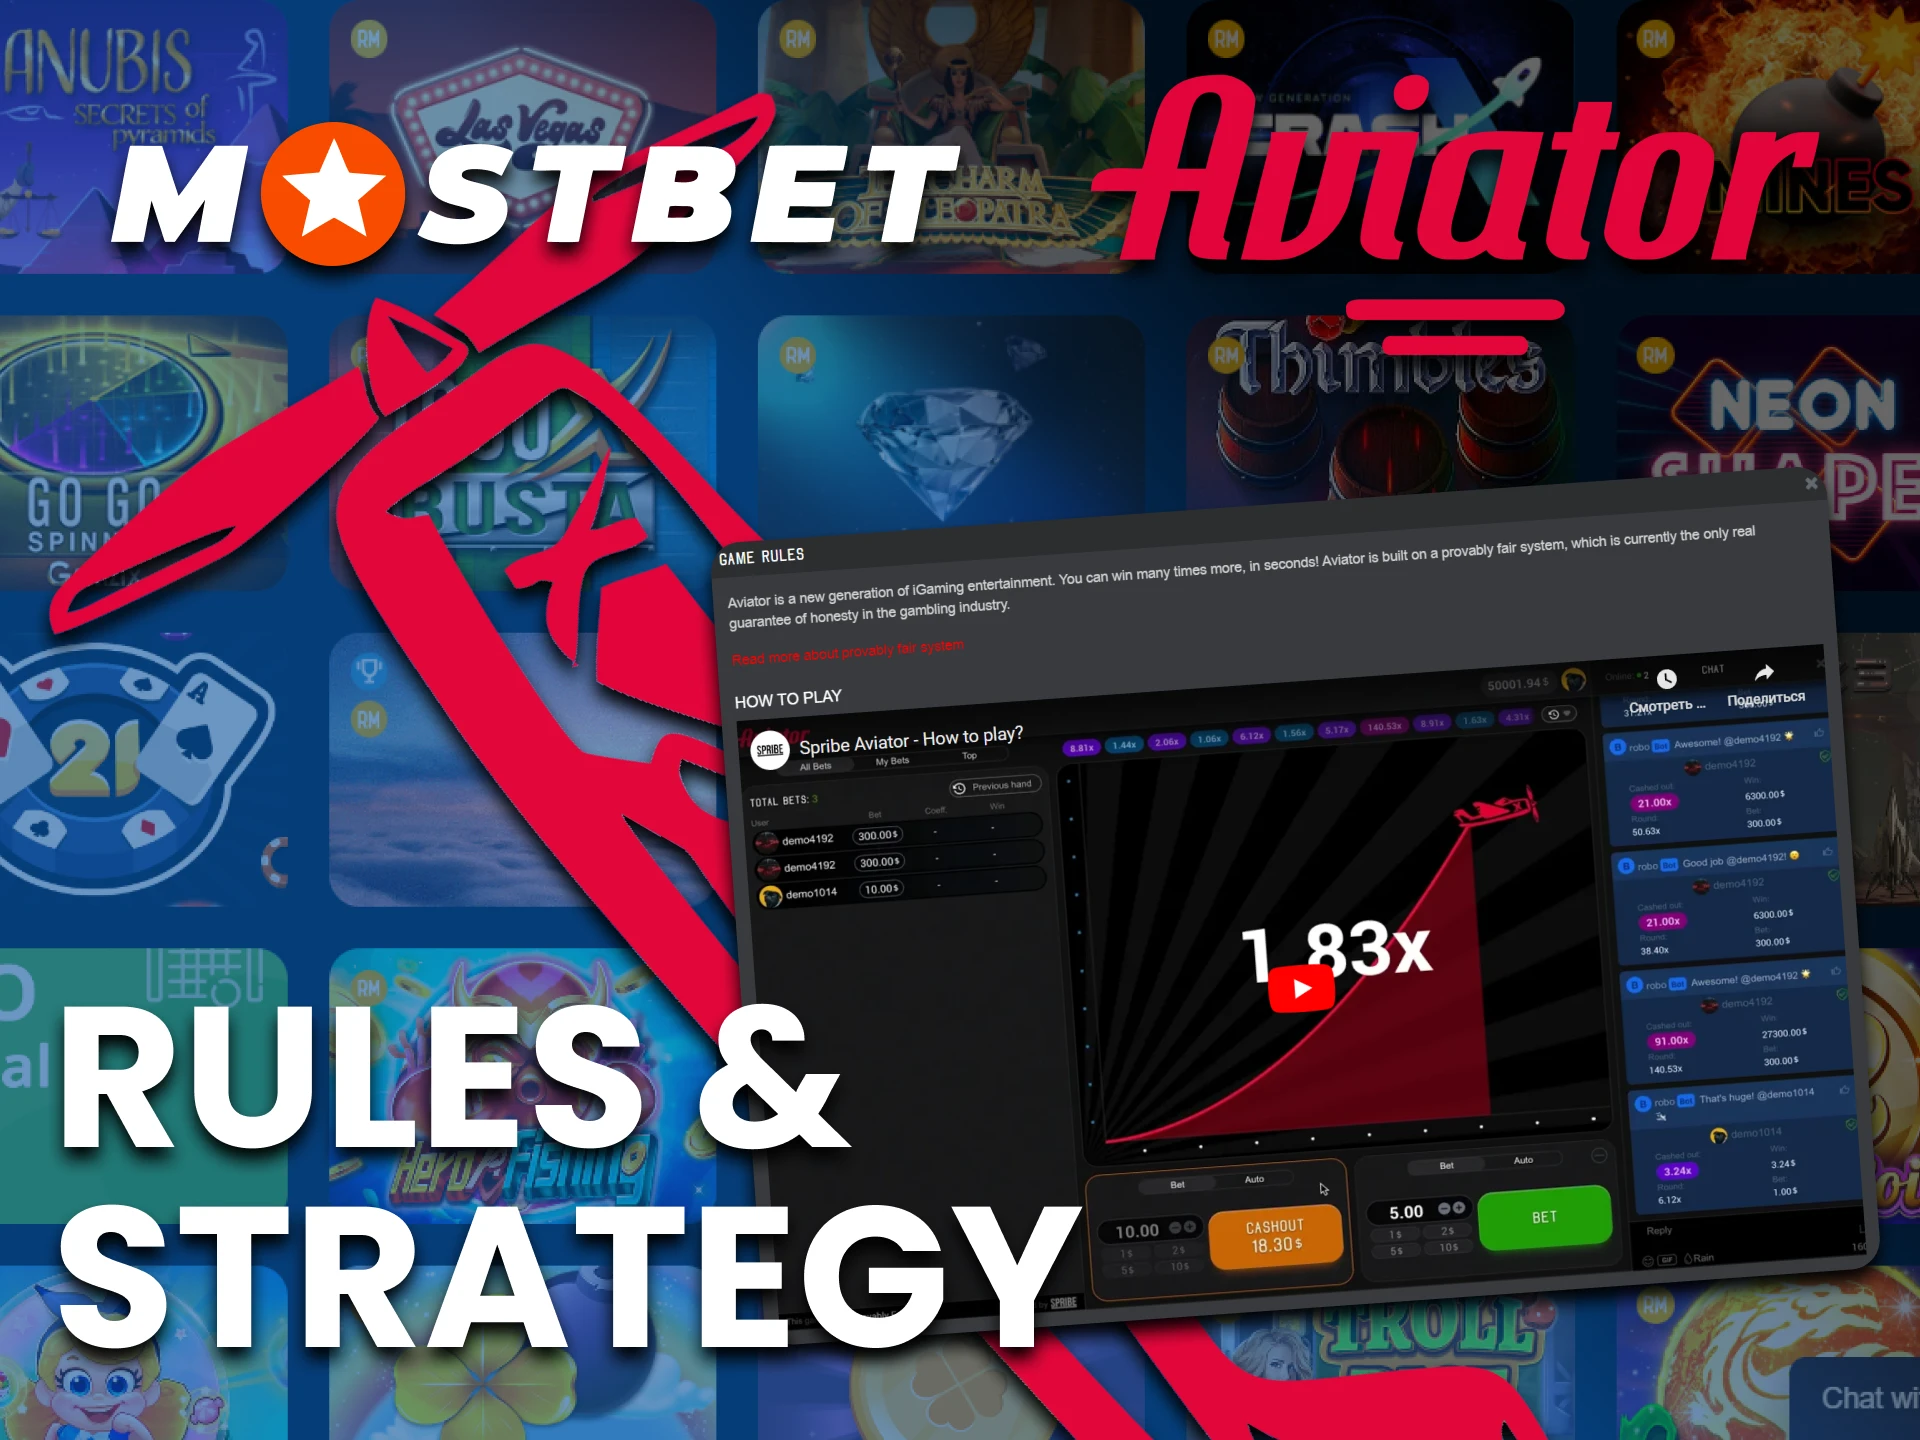 Follow the Mostbet rules while playing Aviator.